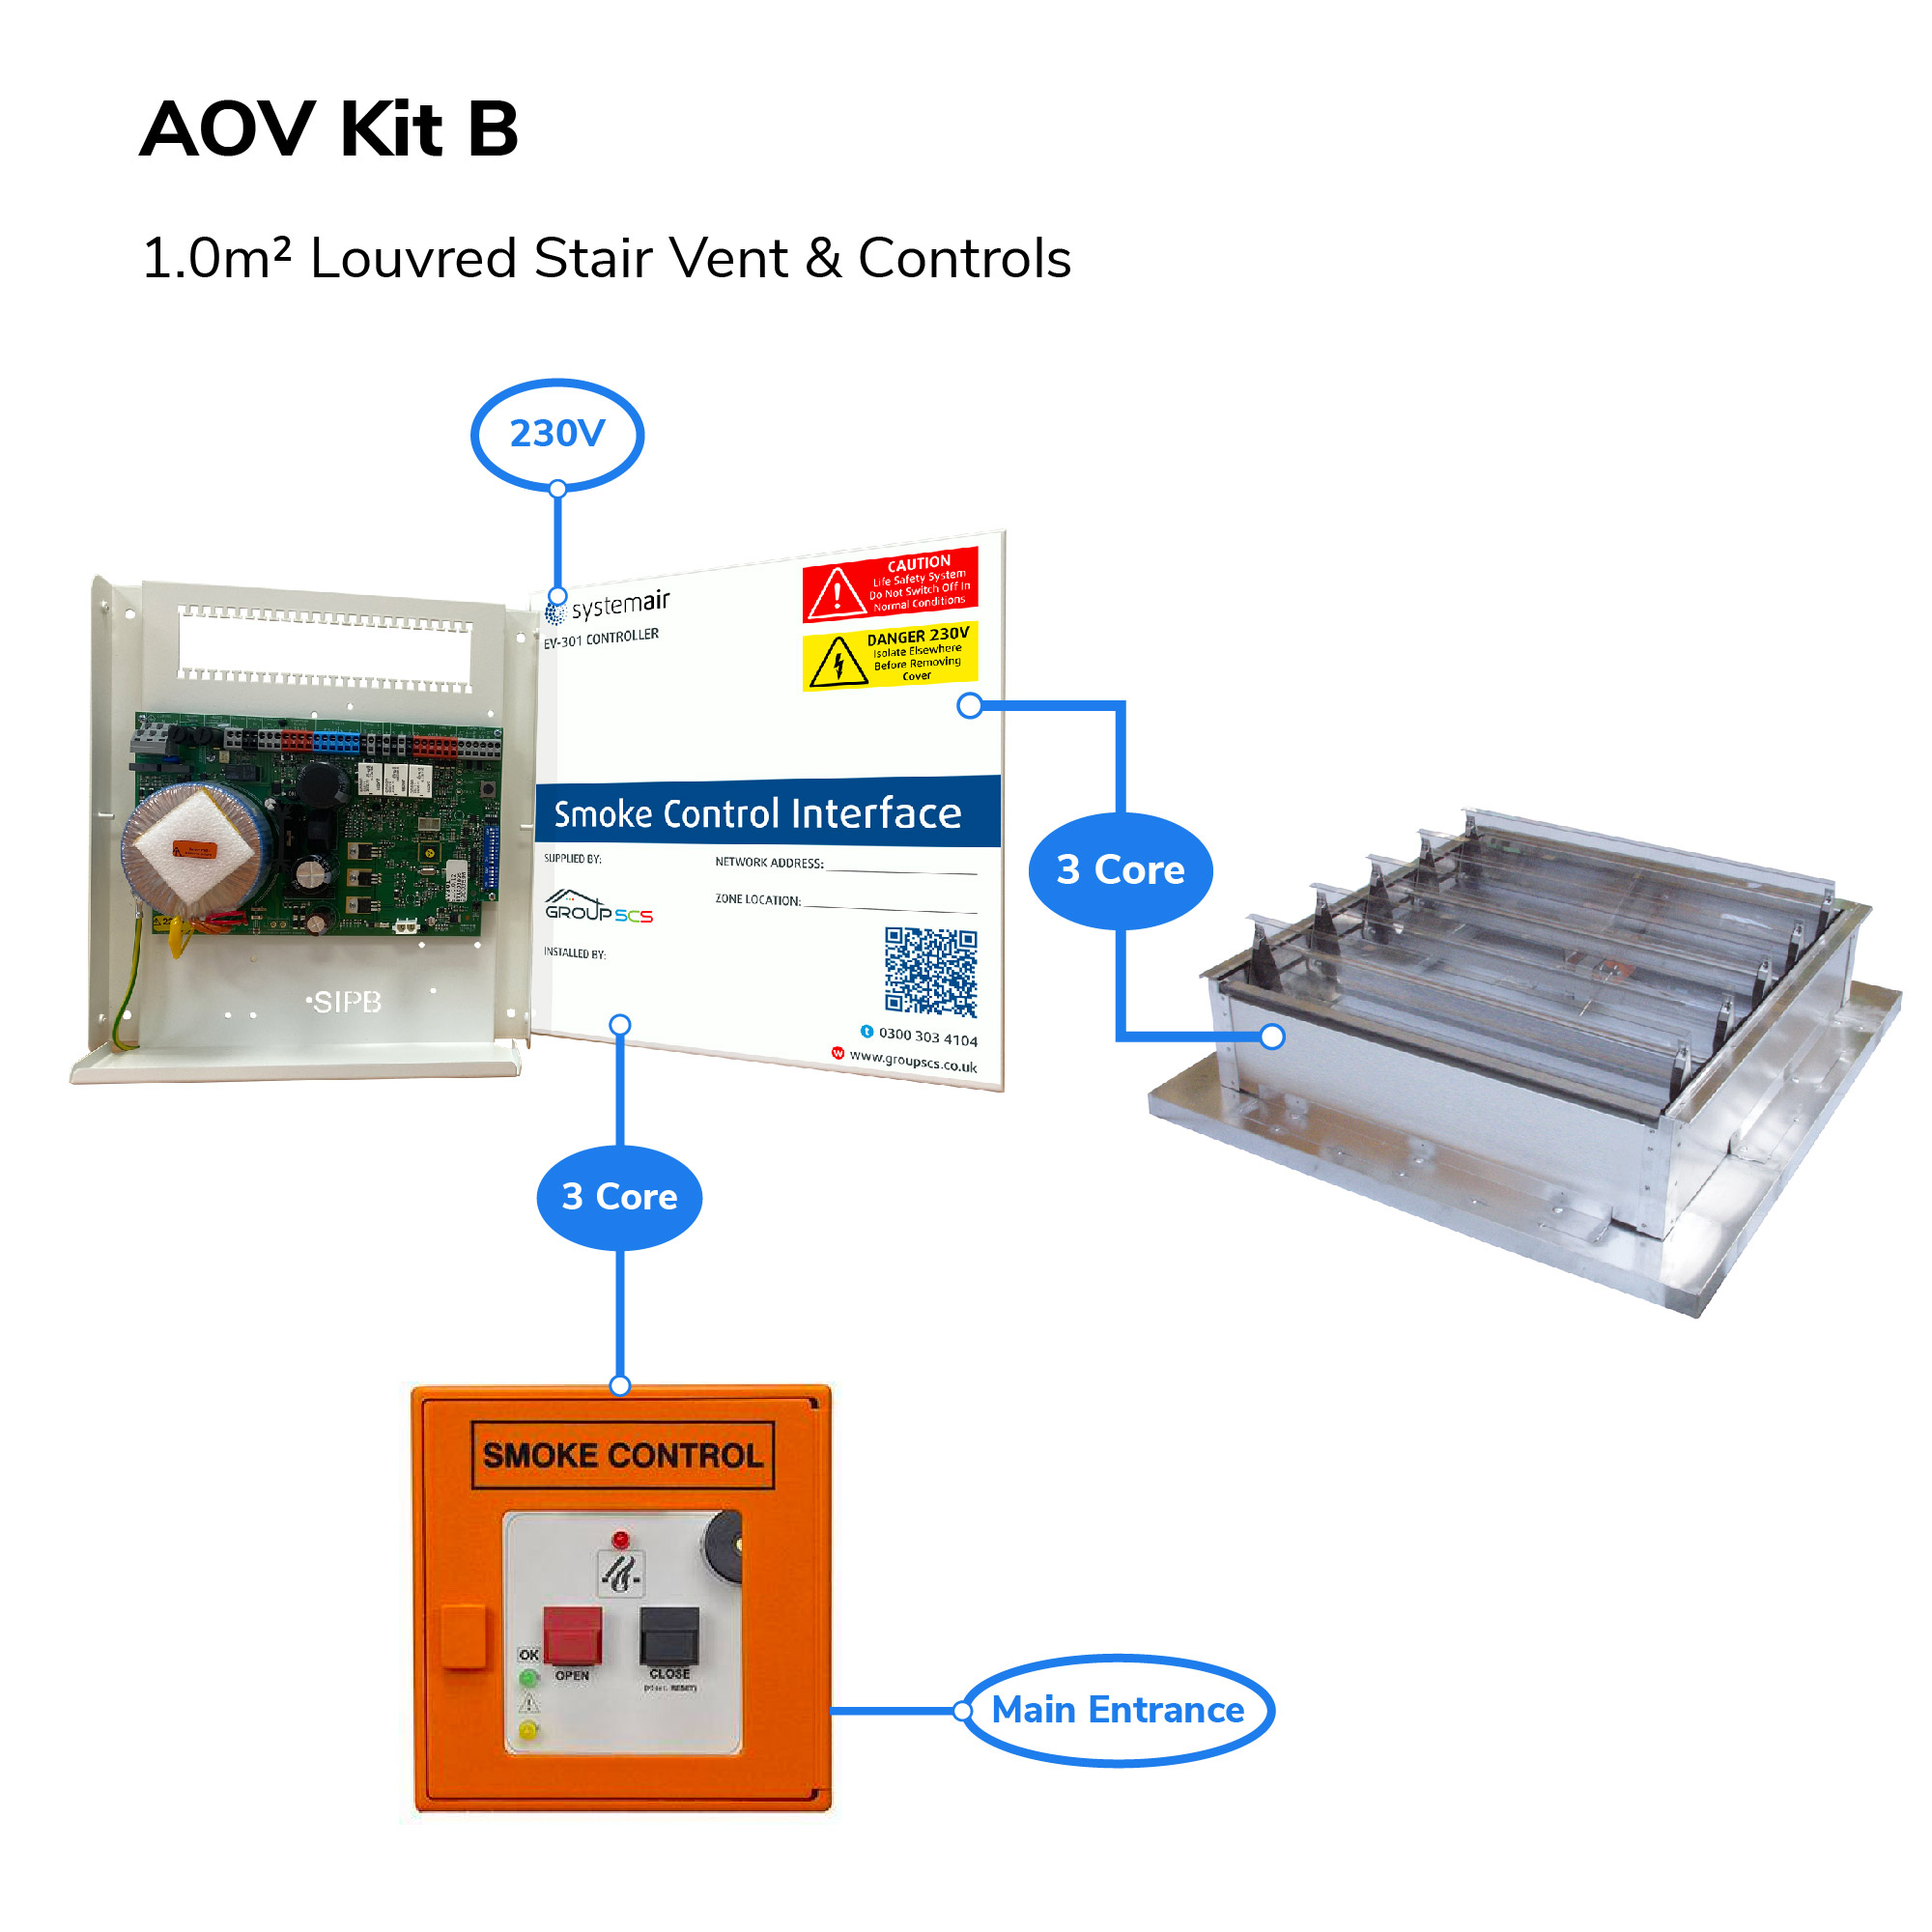 AOV Kit B Overview Image